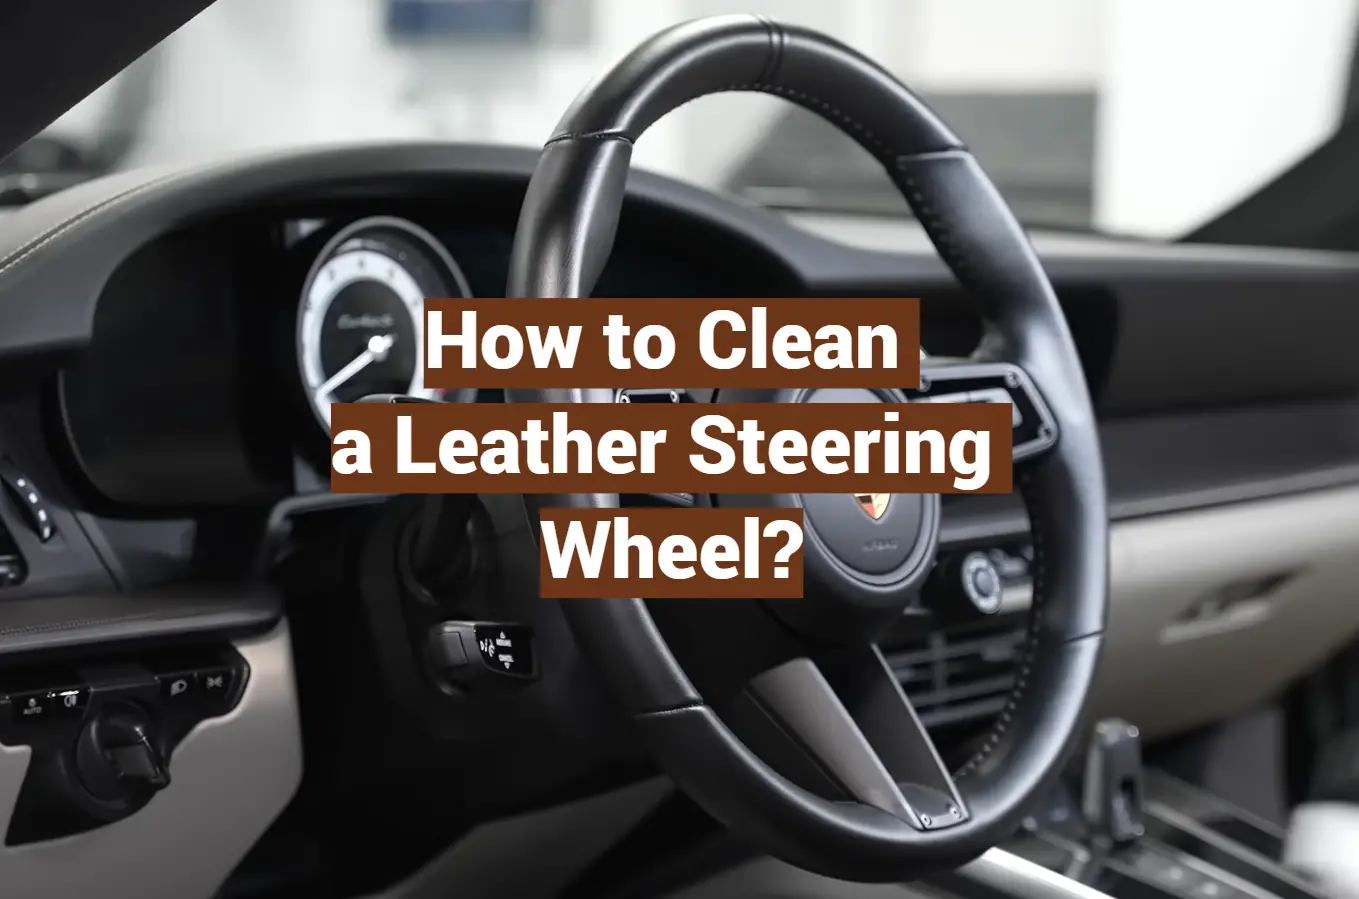 How to Clean a Leather Steering Wheel?